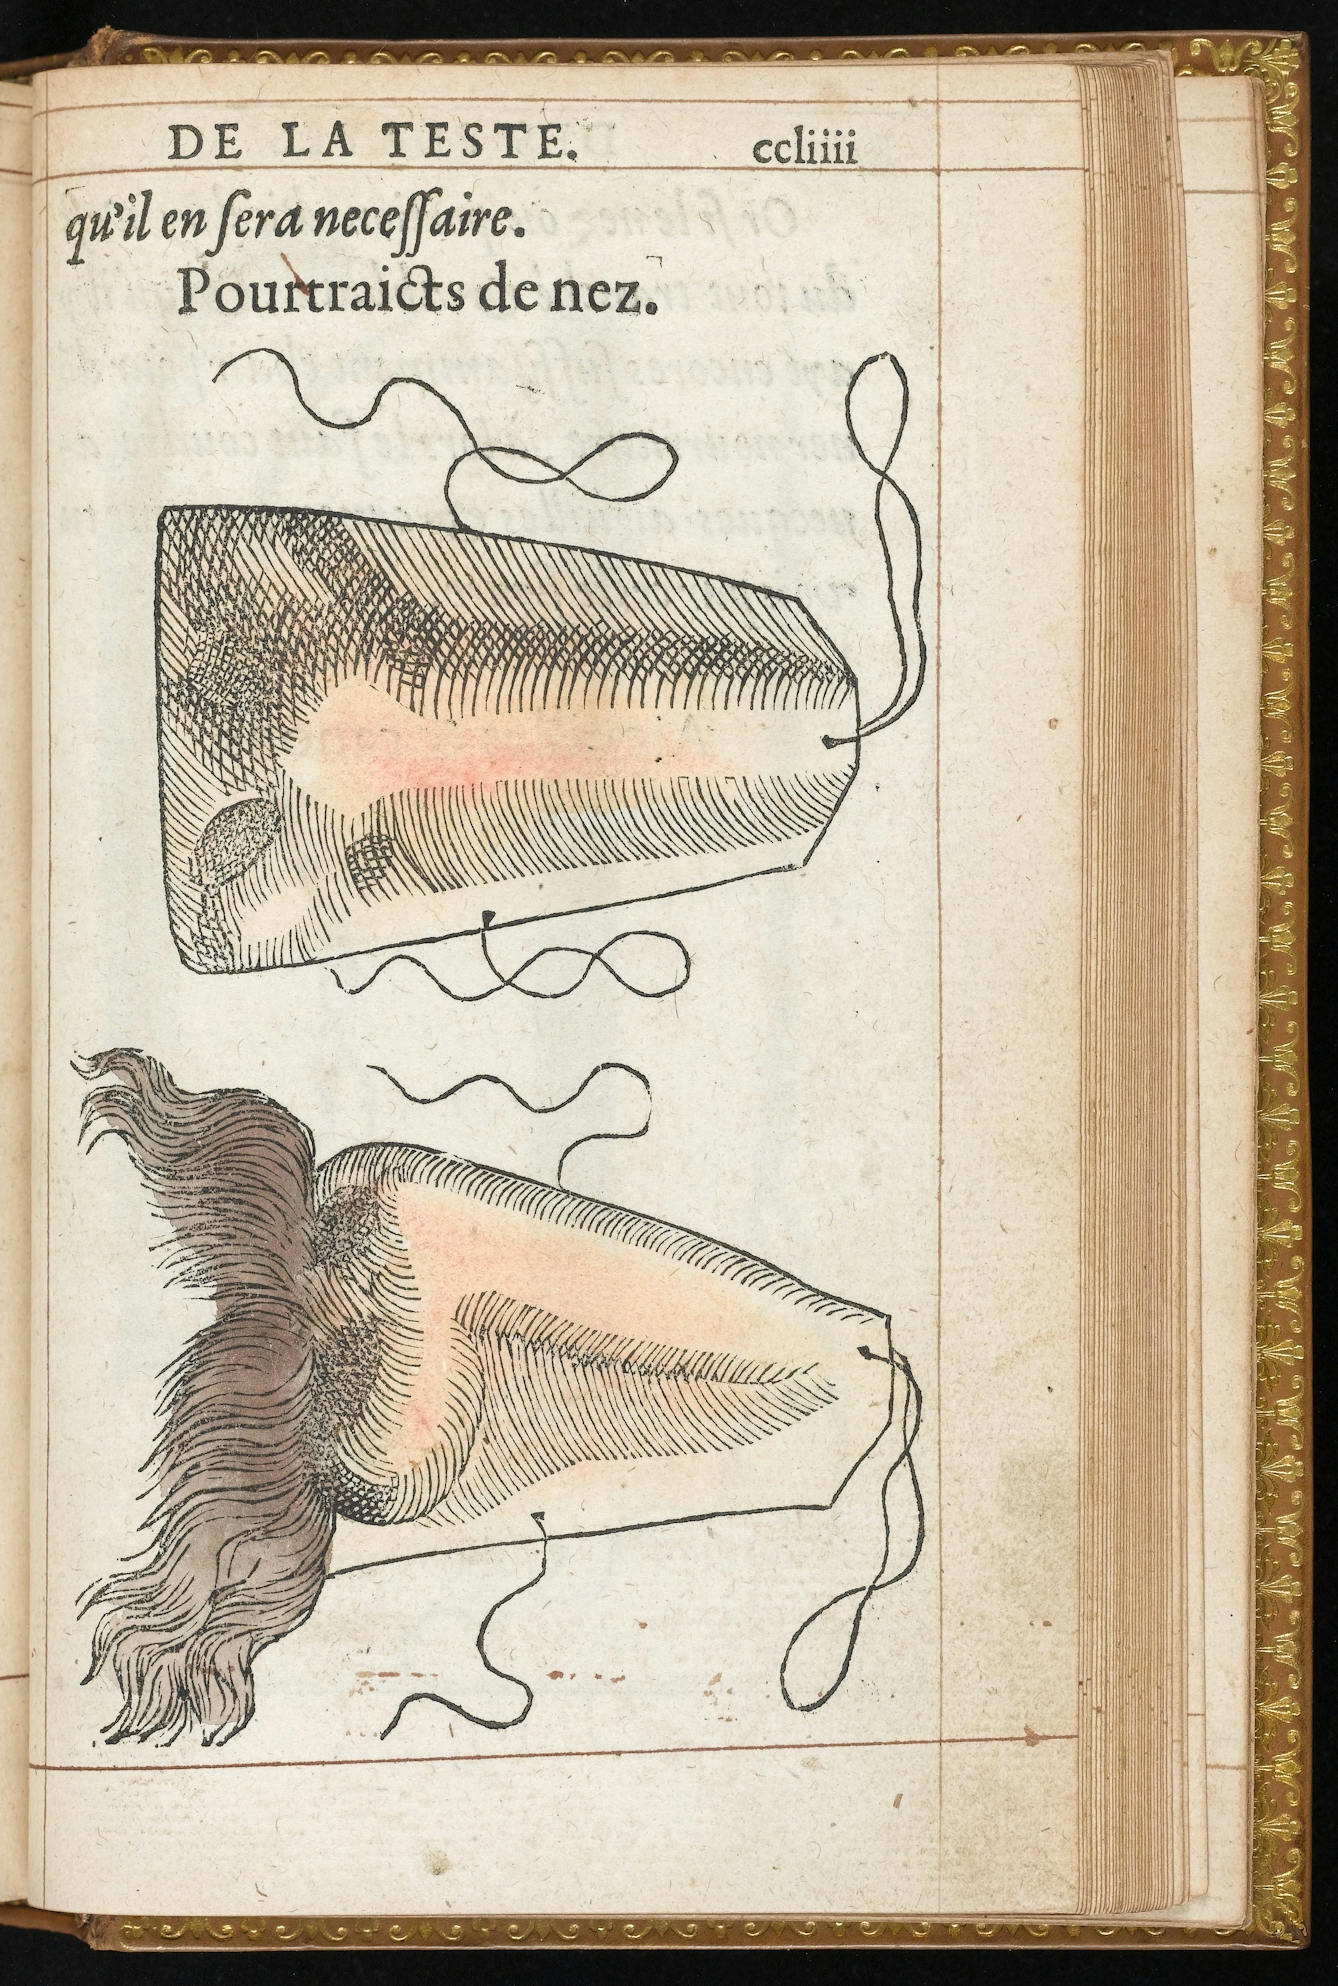 Two drawings of artificial noses on a page of a book.